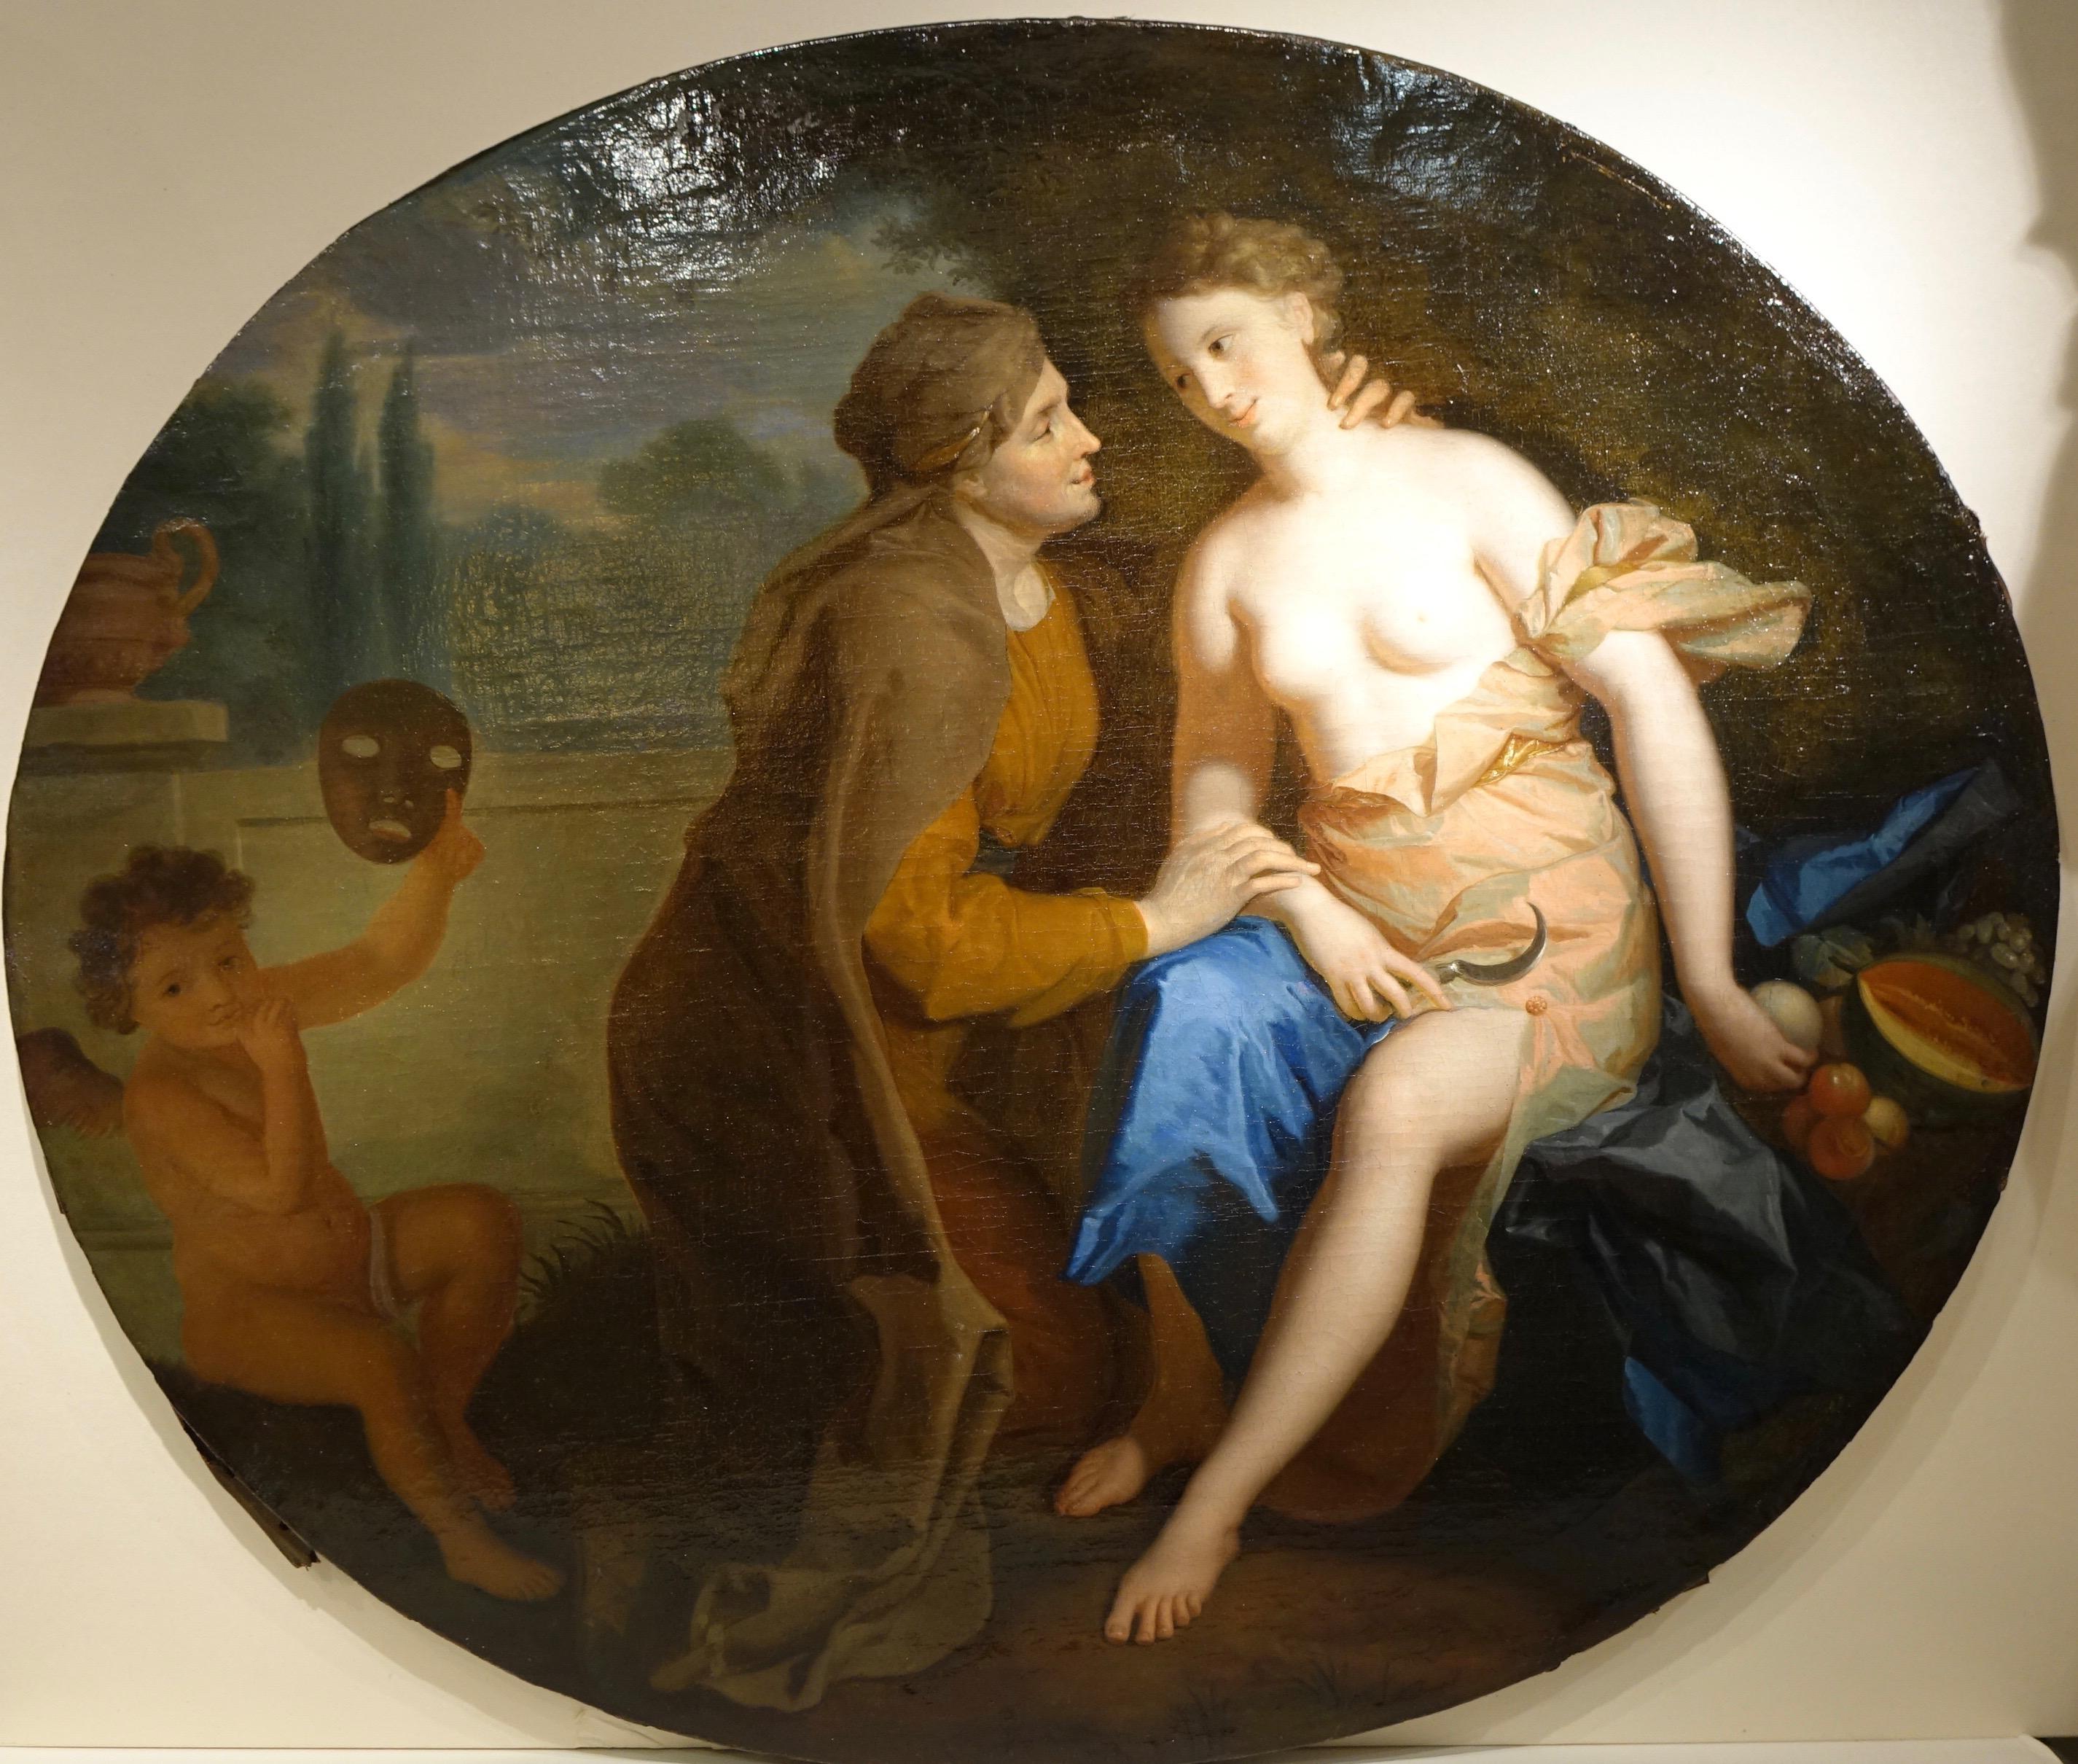 Oil on canvas representing Vertumnus and Pomona ,goddess of fruits.
Pomona is a nymph of great beauty who watches over the fruits and gardens. Vertumnus, god of orchards and wine, watches over the transformations of nature over the seasons.
 He